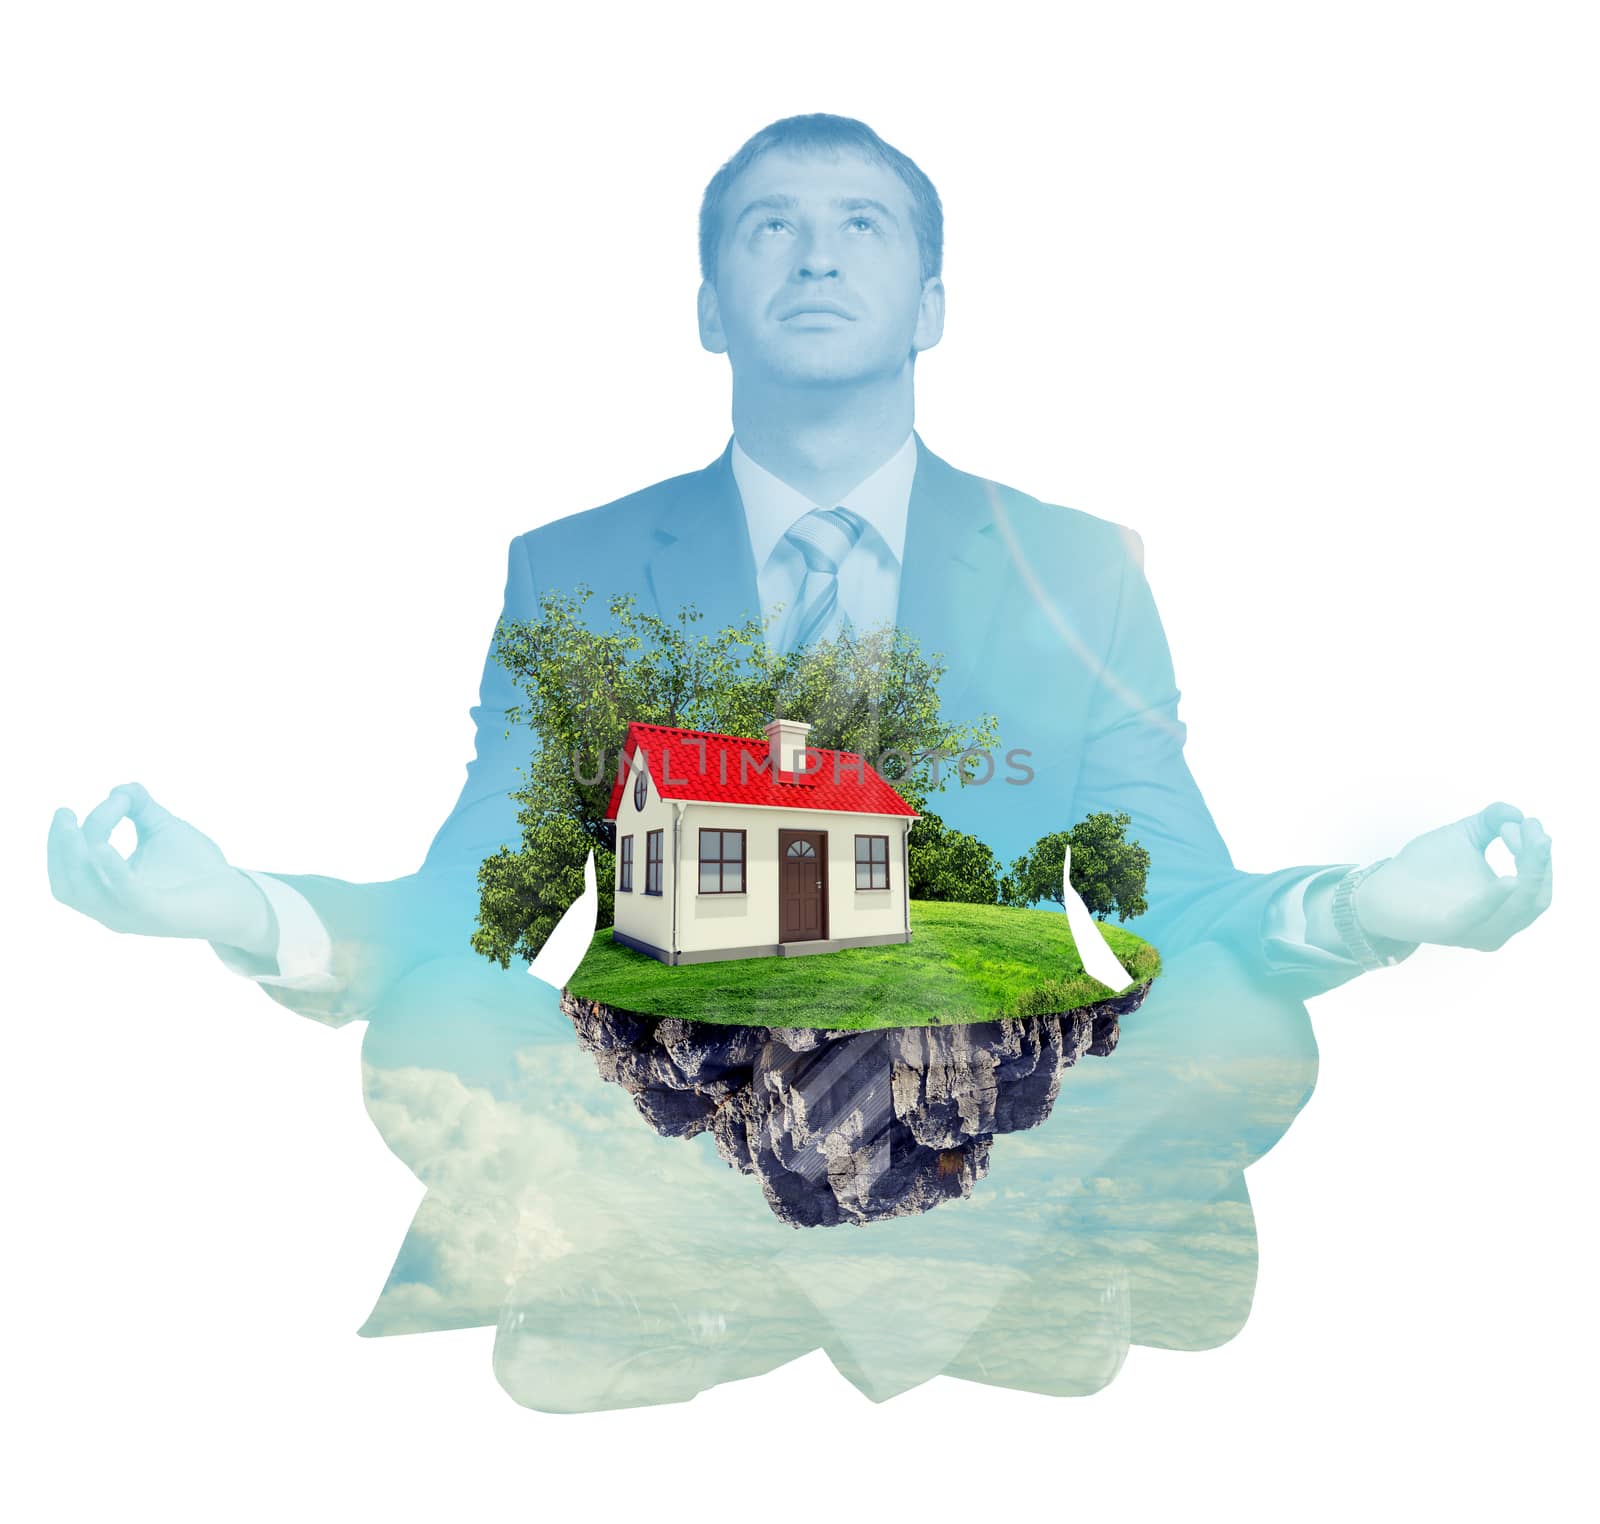 Transparent silhouette of businessman in lotus posture and looking up on isolated white background